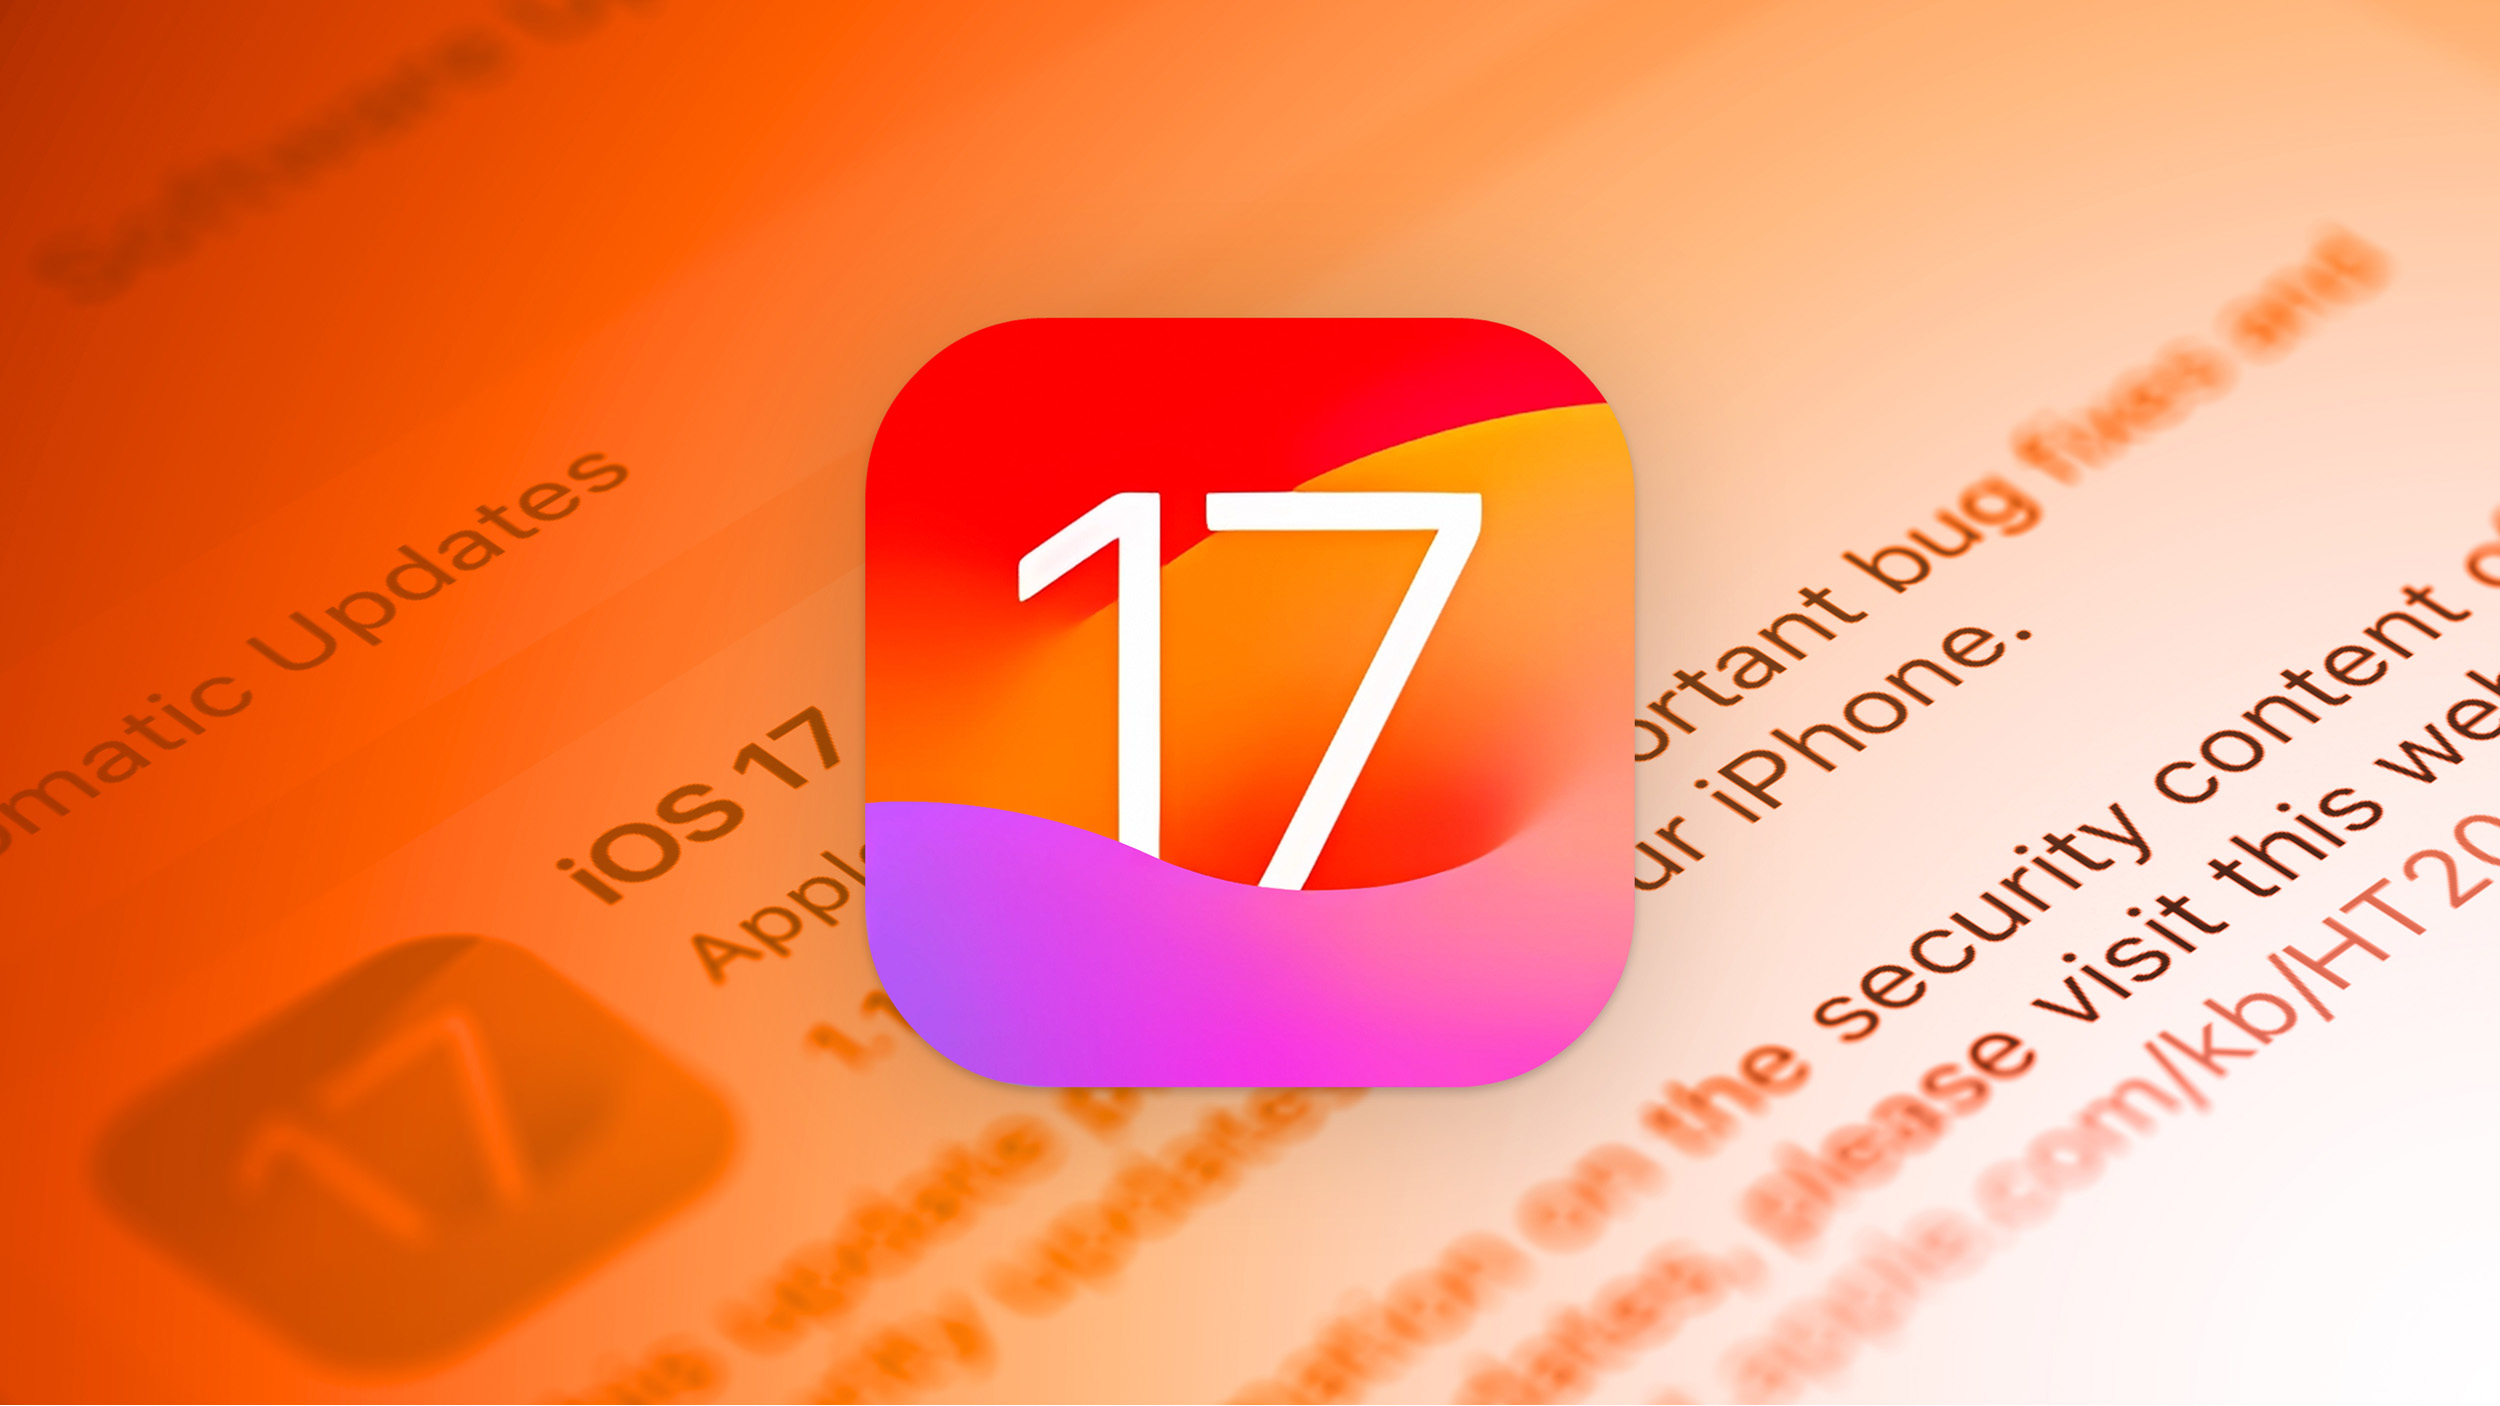 Just Install iOS 17 Feature